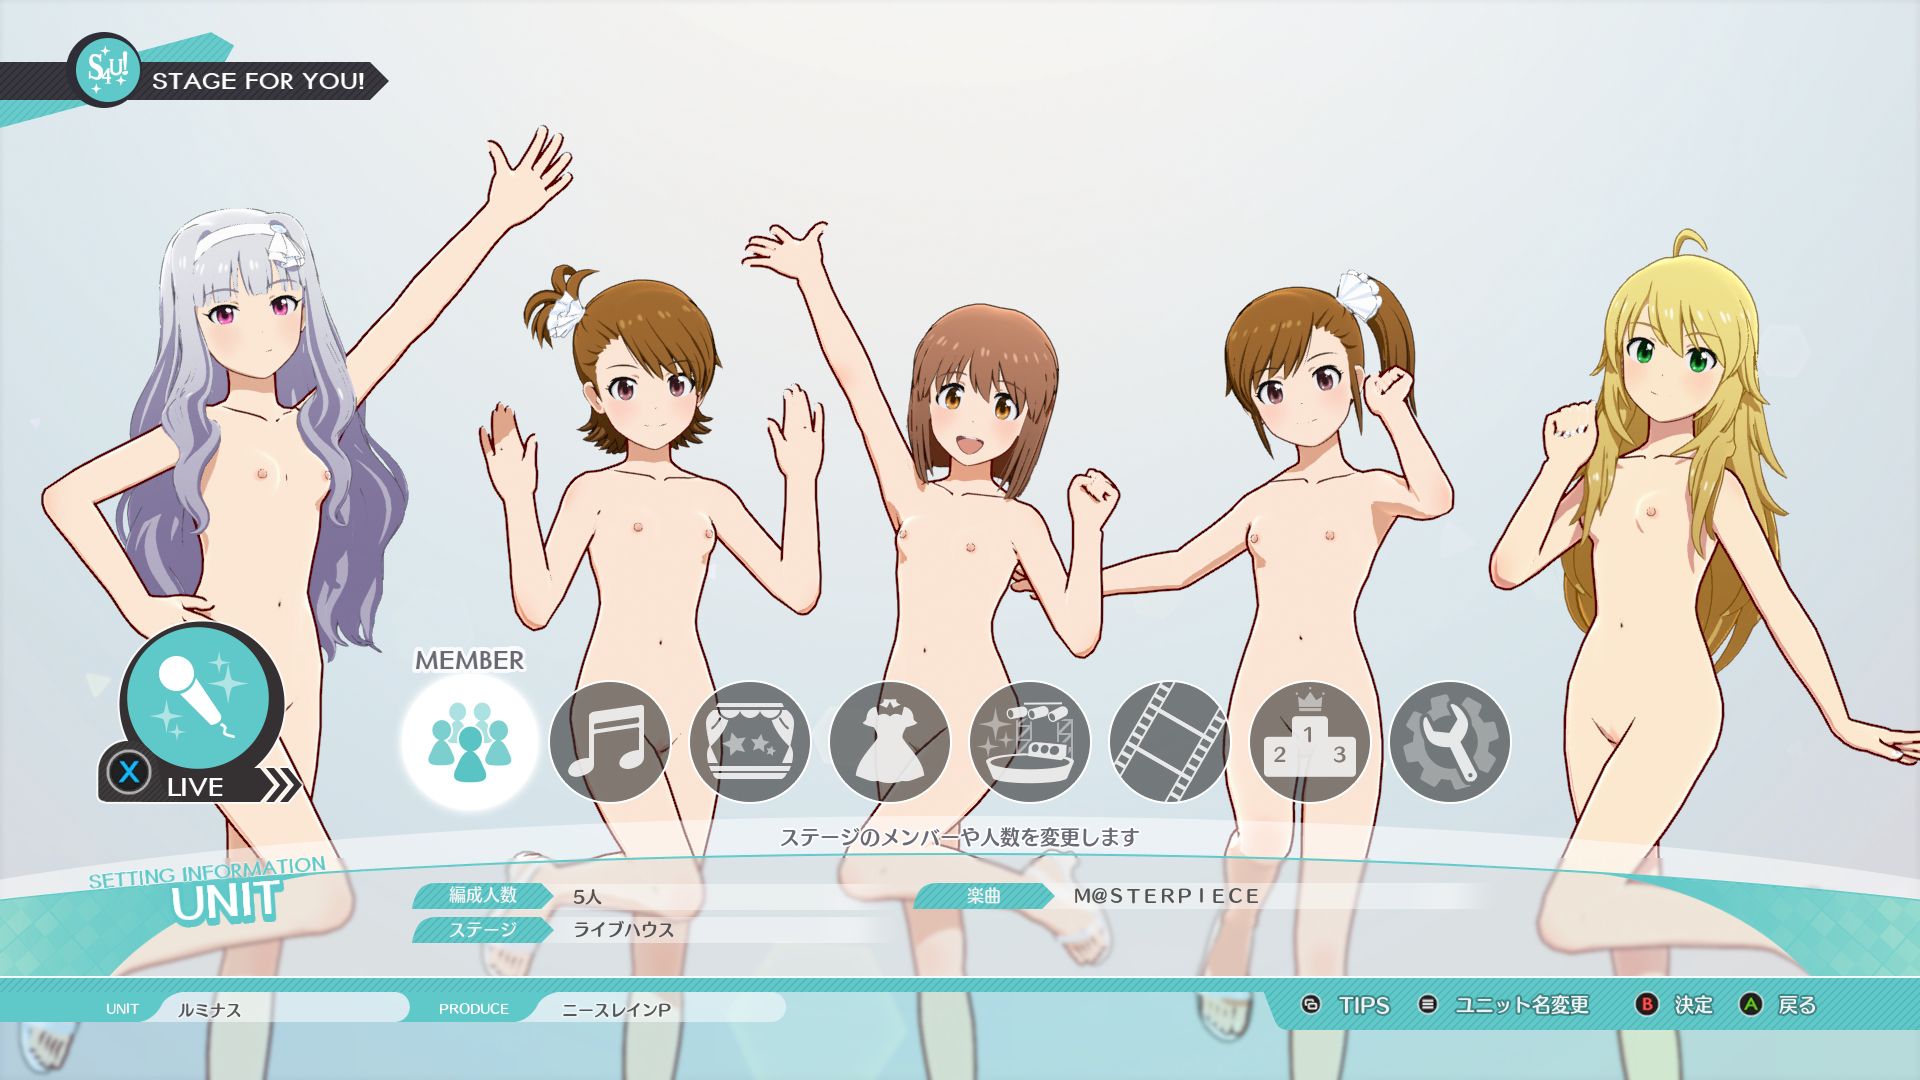 【Sad news】The latest work of The Idolmaster, a completely naked mod will be made 1